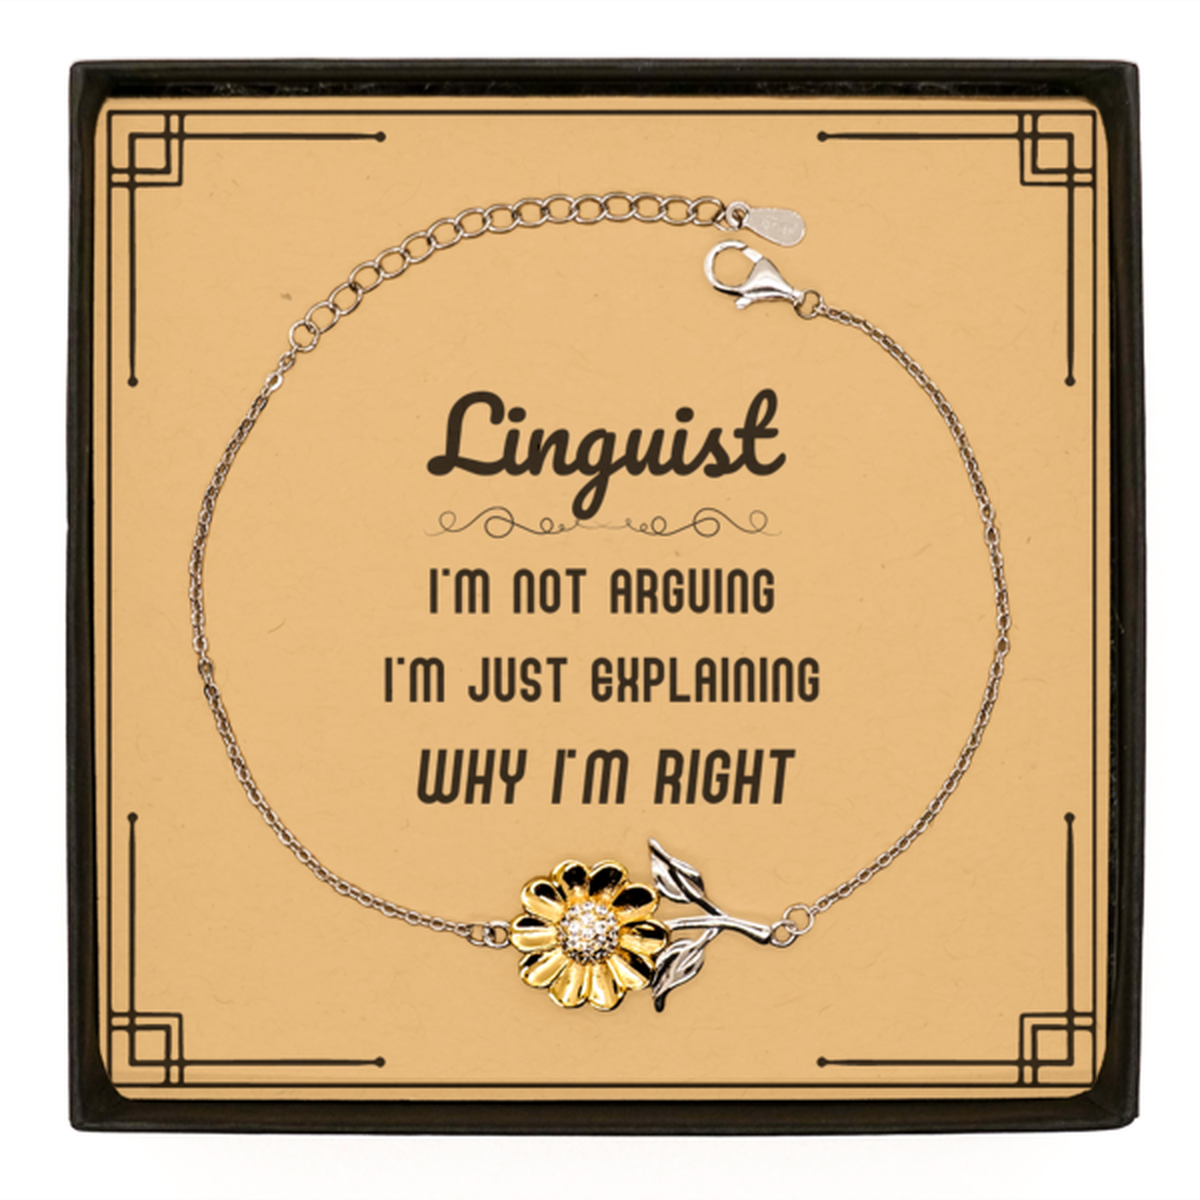 Linguist I'm not Arguing. I'm Just Explaining Why I'm RIGHT Sunflower Bracelet, Funny Saying Quote Linguist Gifts For Linguist Message Card Graduation Birthday Christmas Gifts for Men Women Coworker